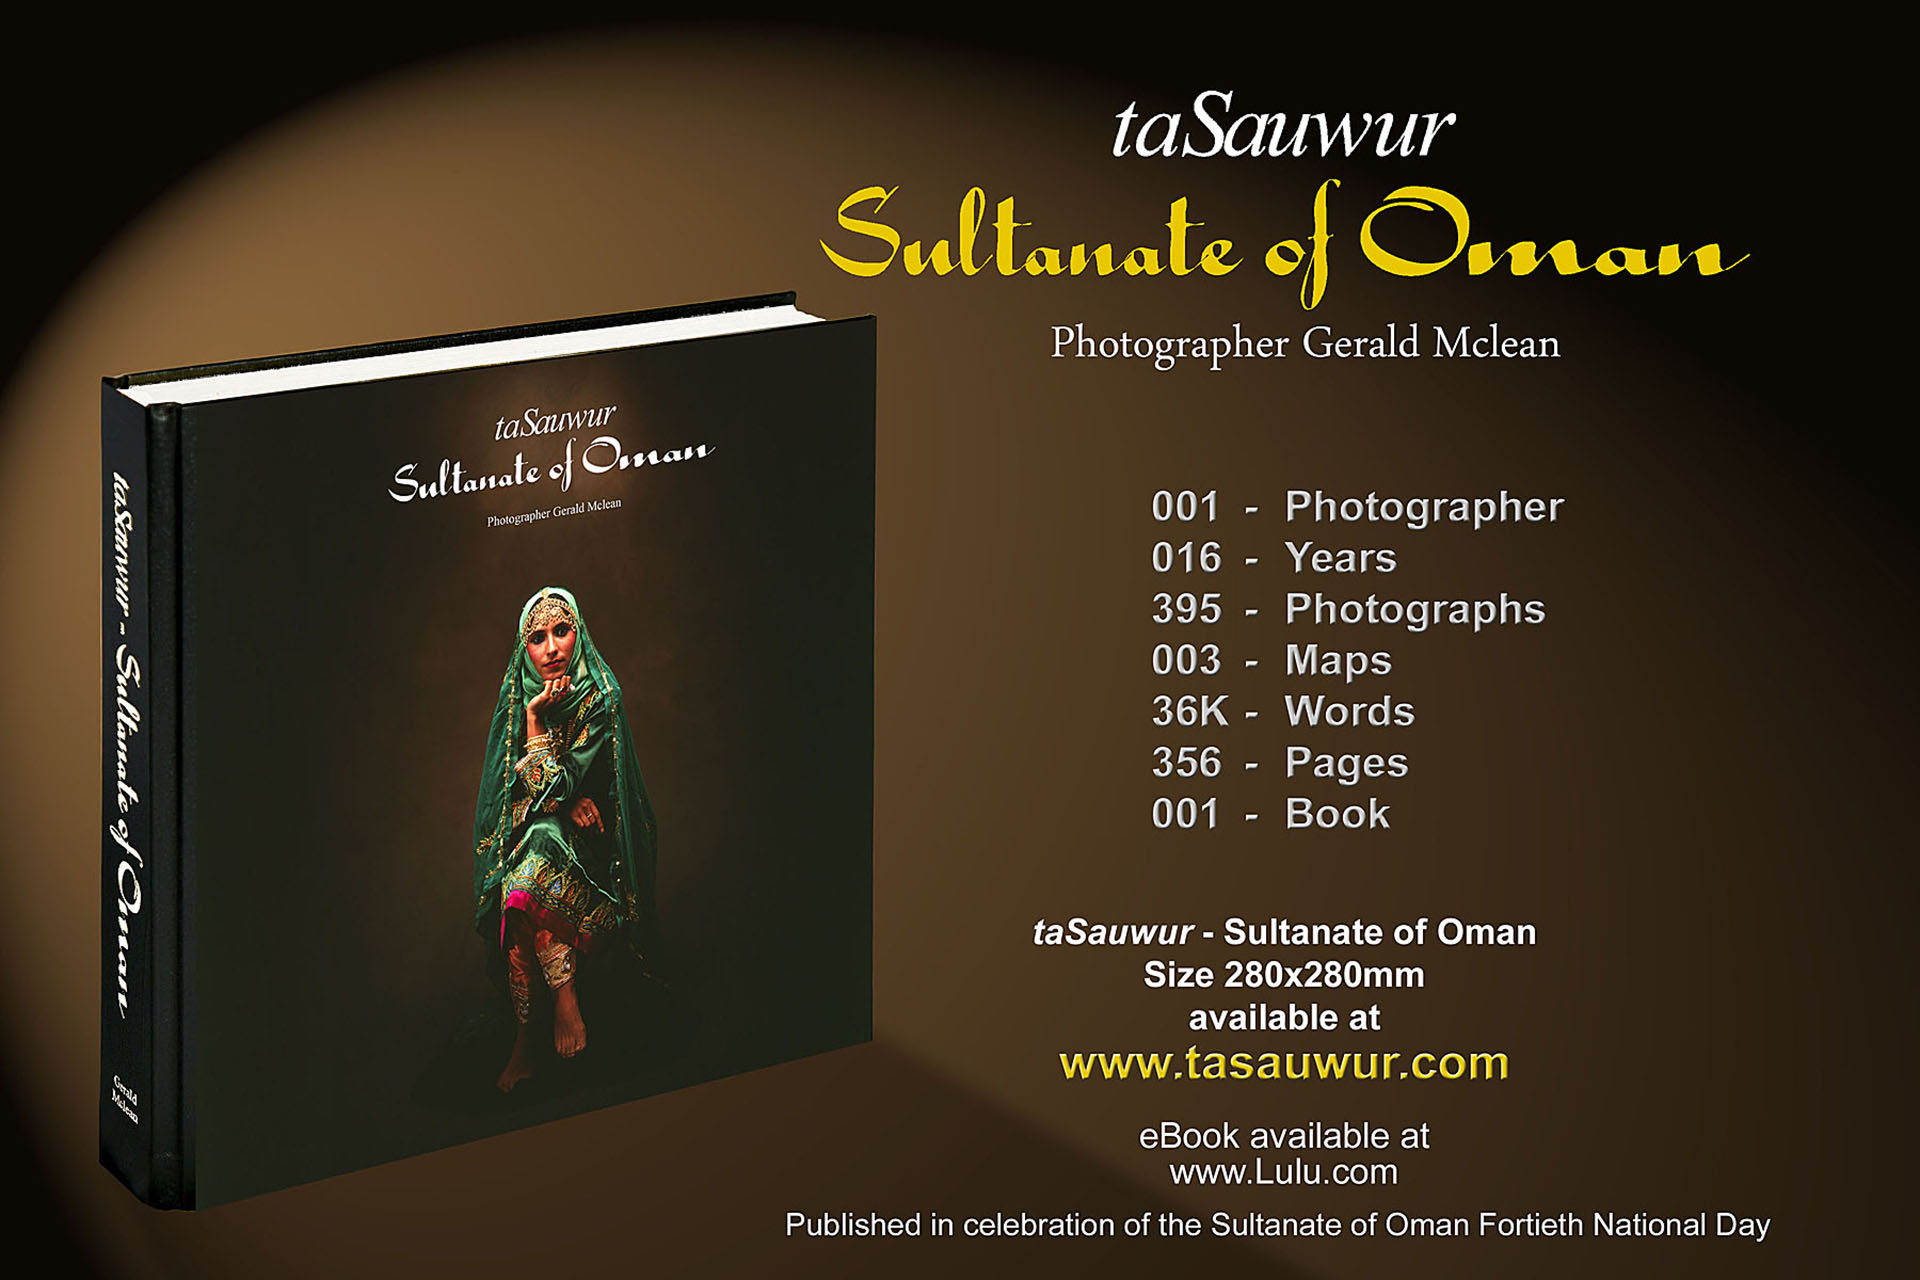 taSauwur Sultanate of Oman by Gerald McLean